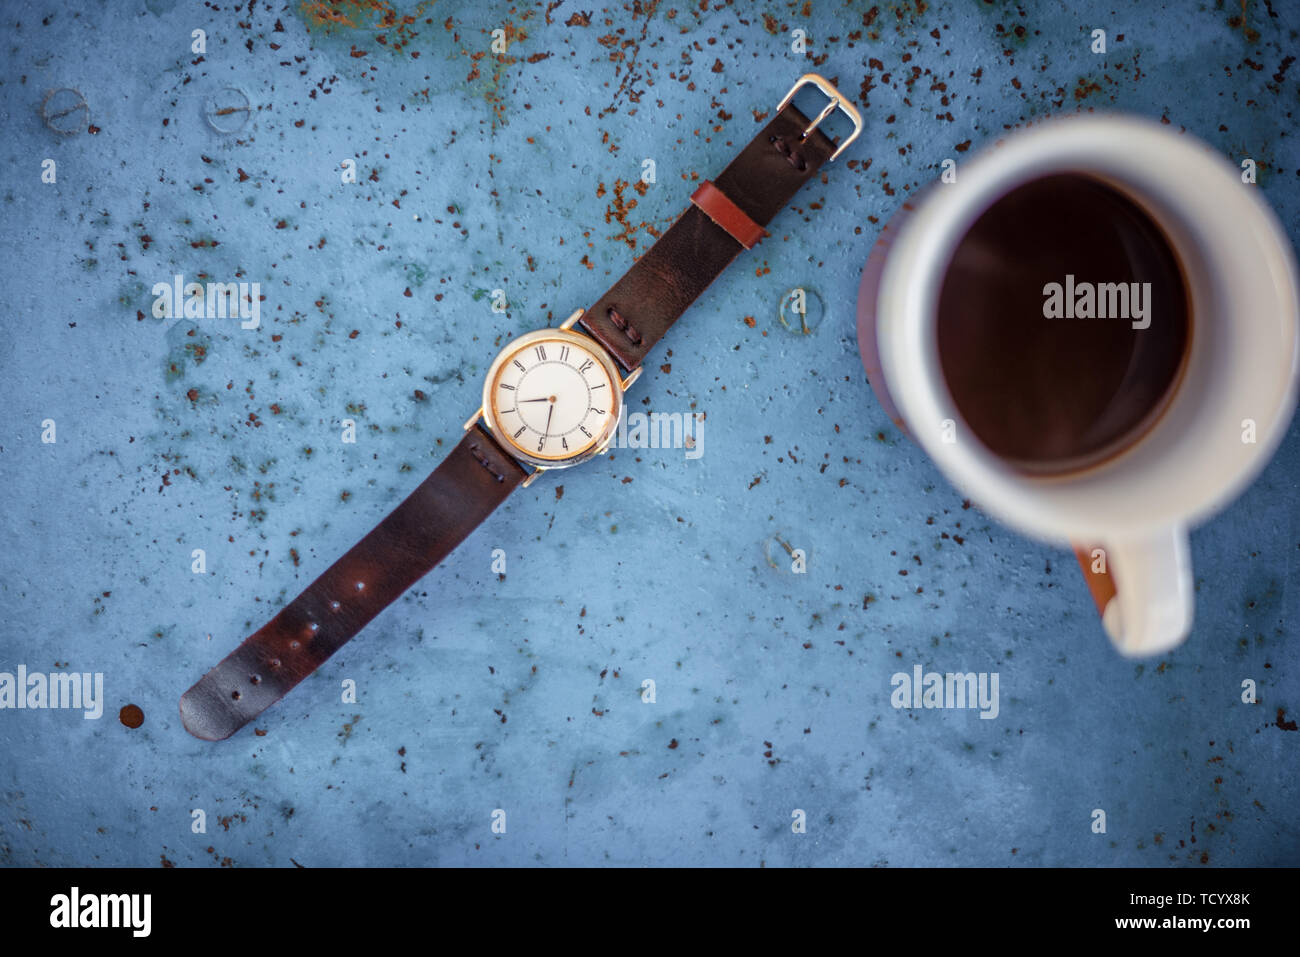 Vintage wrist watch on rustic blue metal bench suggesting the time is 07.00, a cup of coffee in the edge of frame. Stock Photo